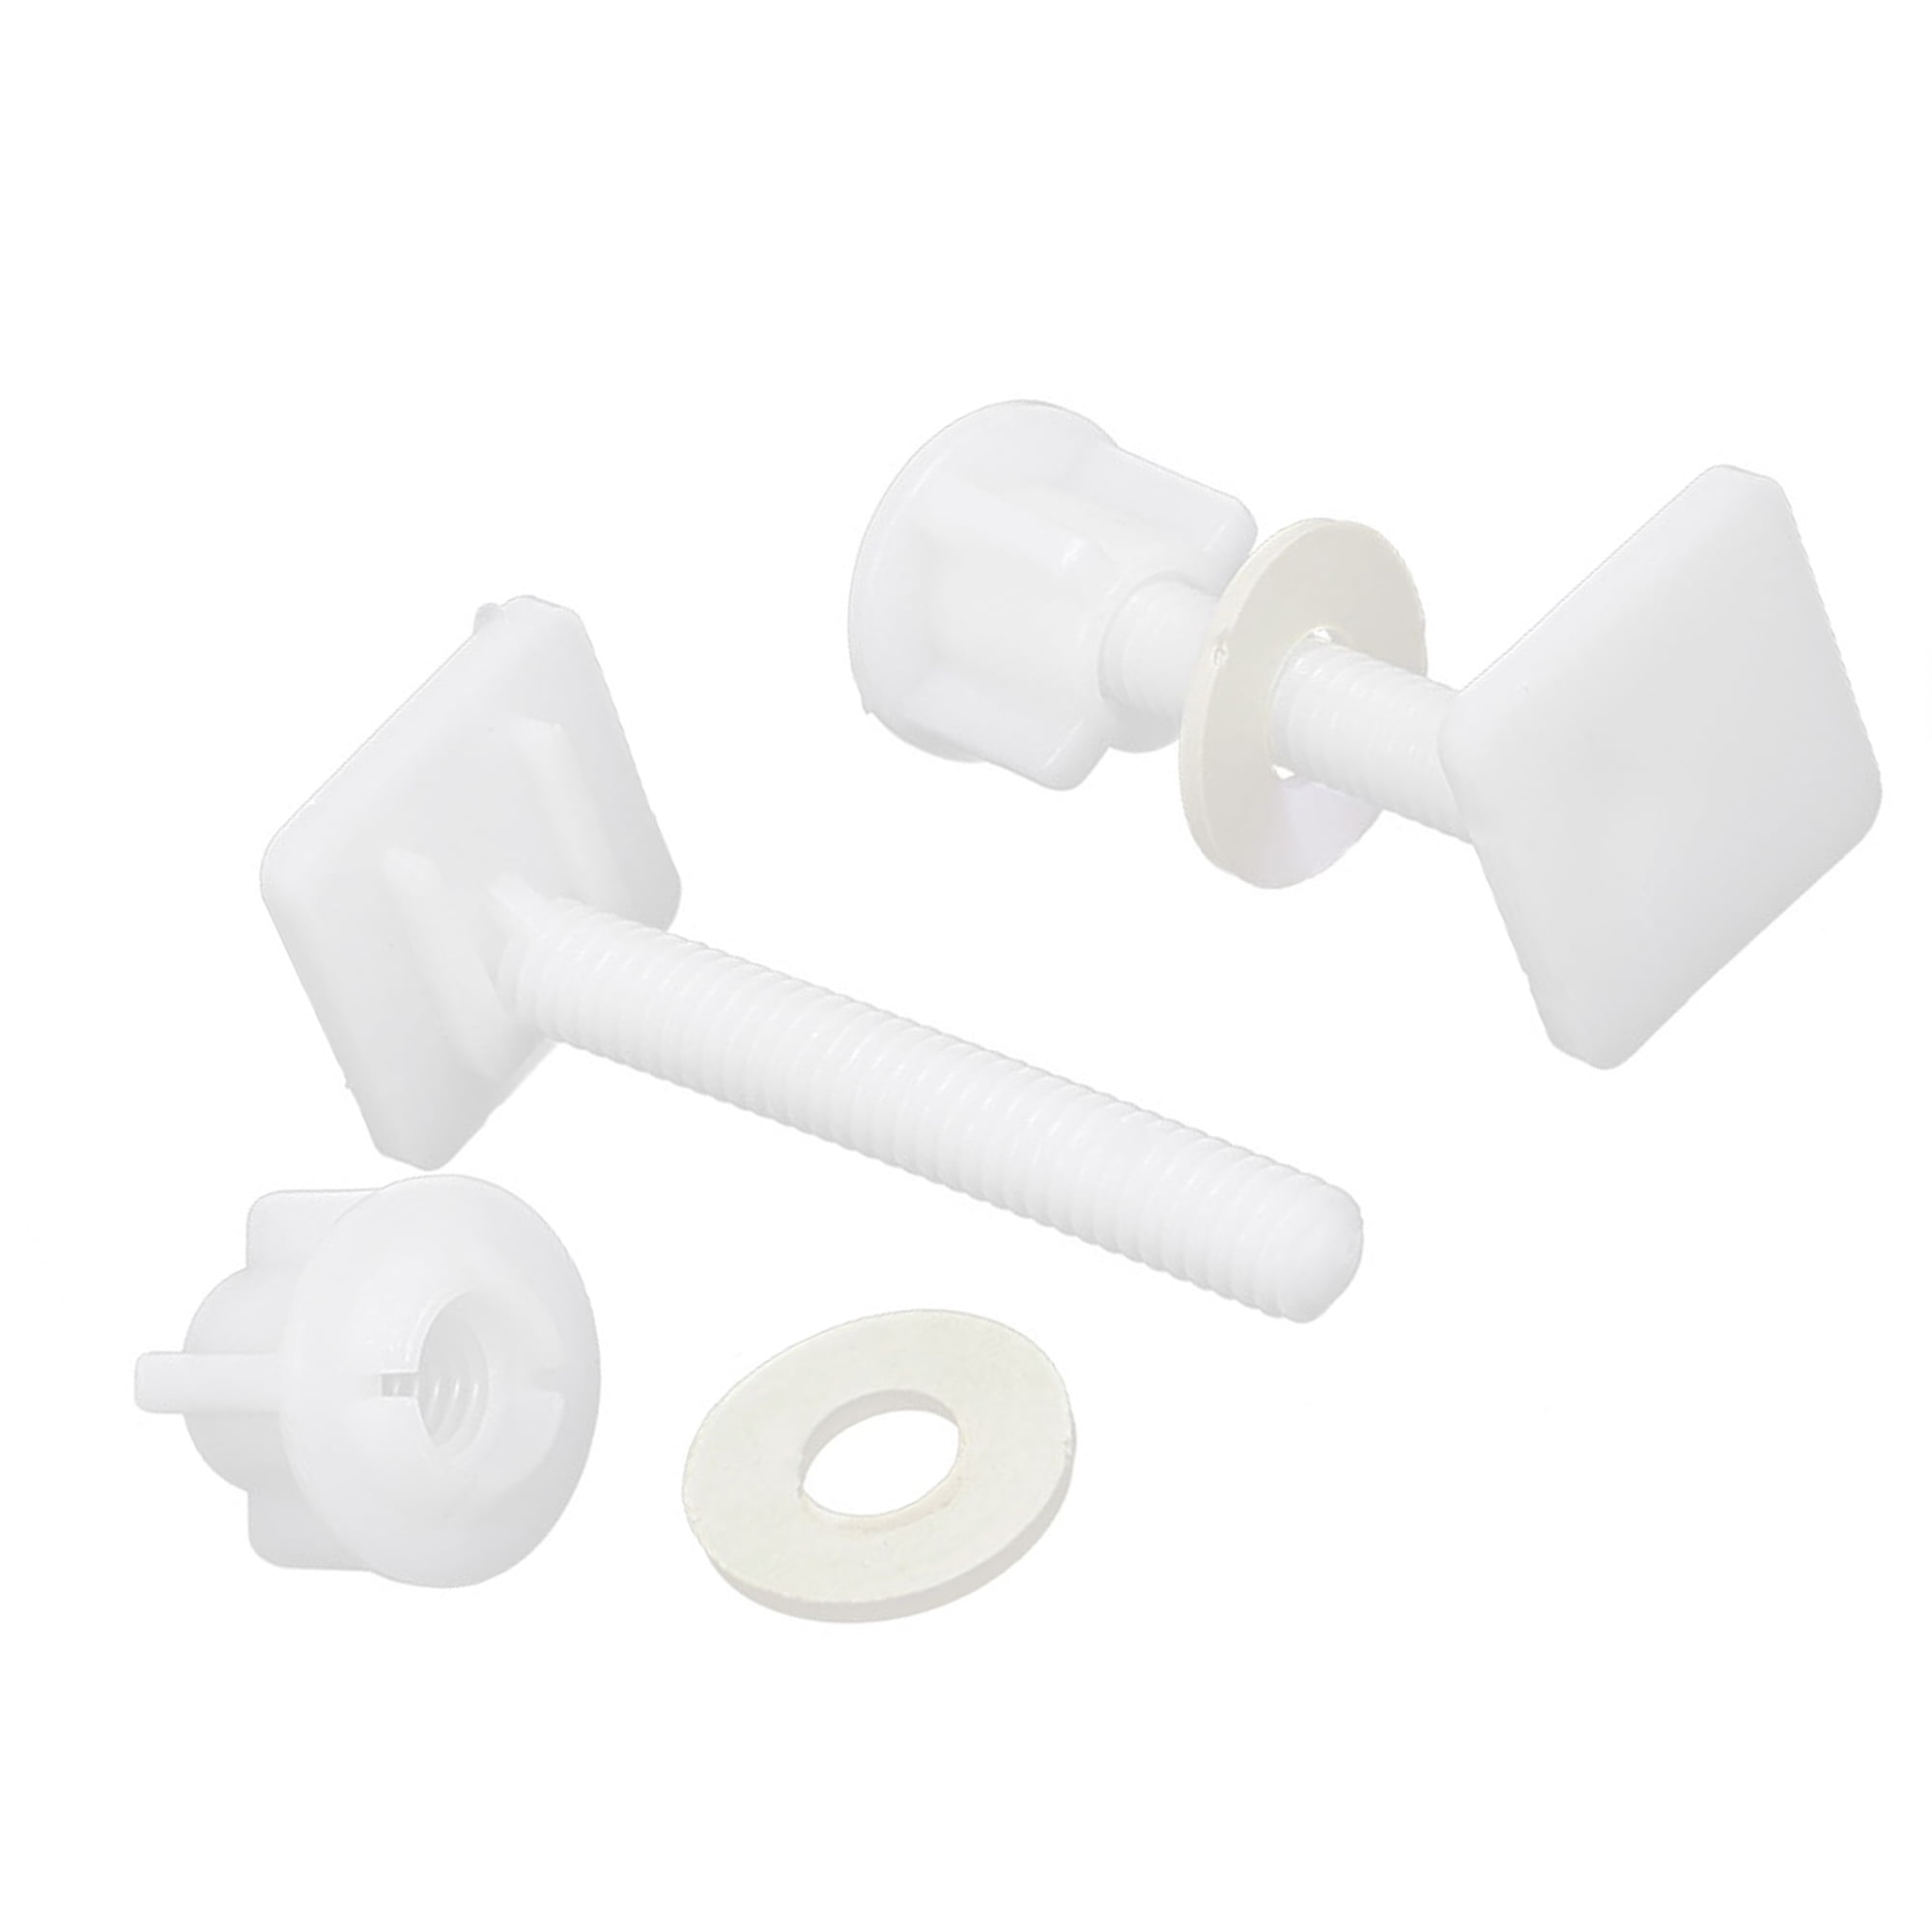 Peerless Replacement Plastic Toilet Bolt Caps Set of 2 Mexican Sand